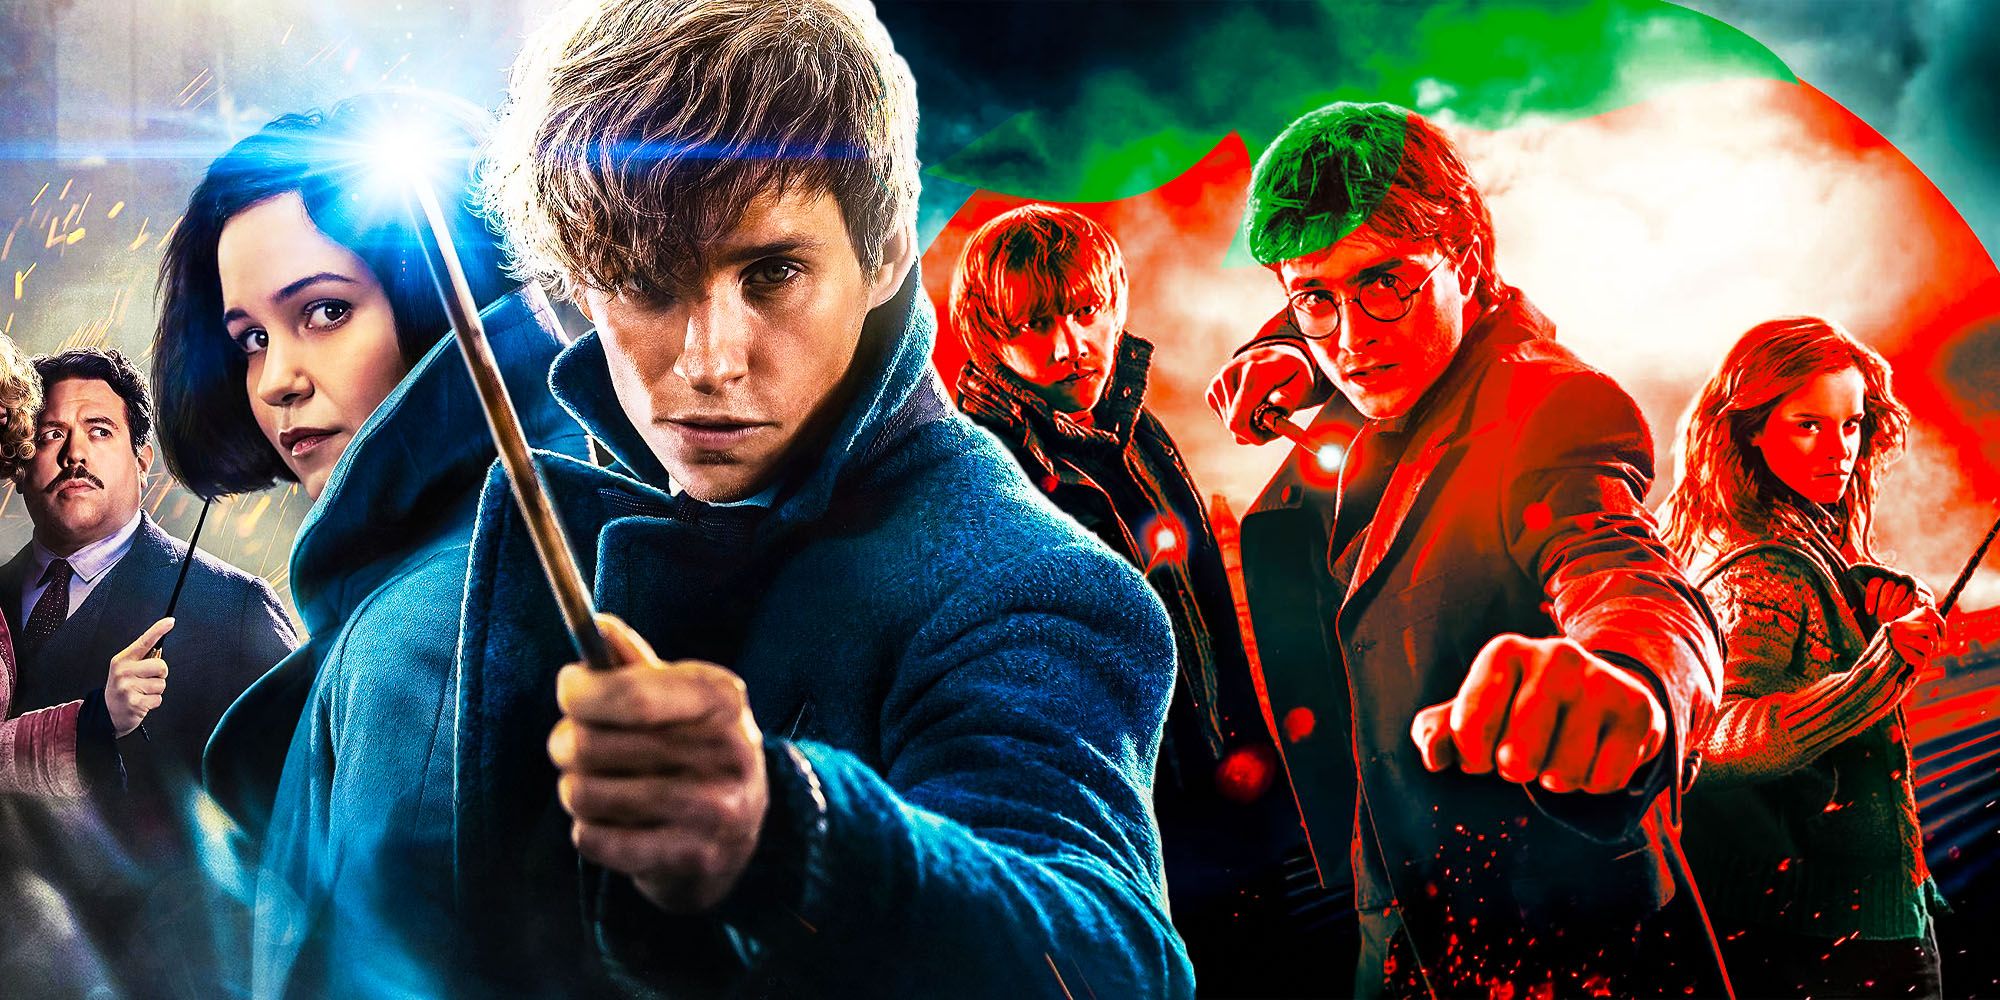 Fantastic beasts and where to find them compared to harry potter movies on rotten tomatoes